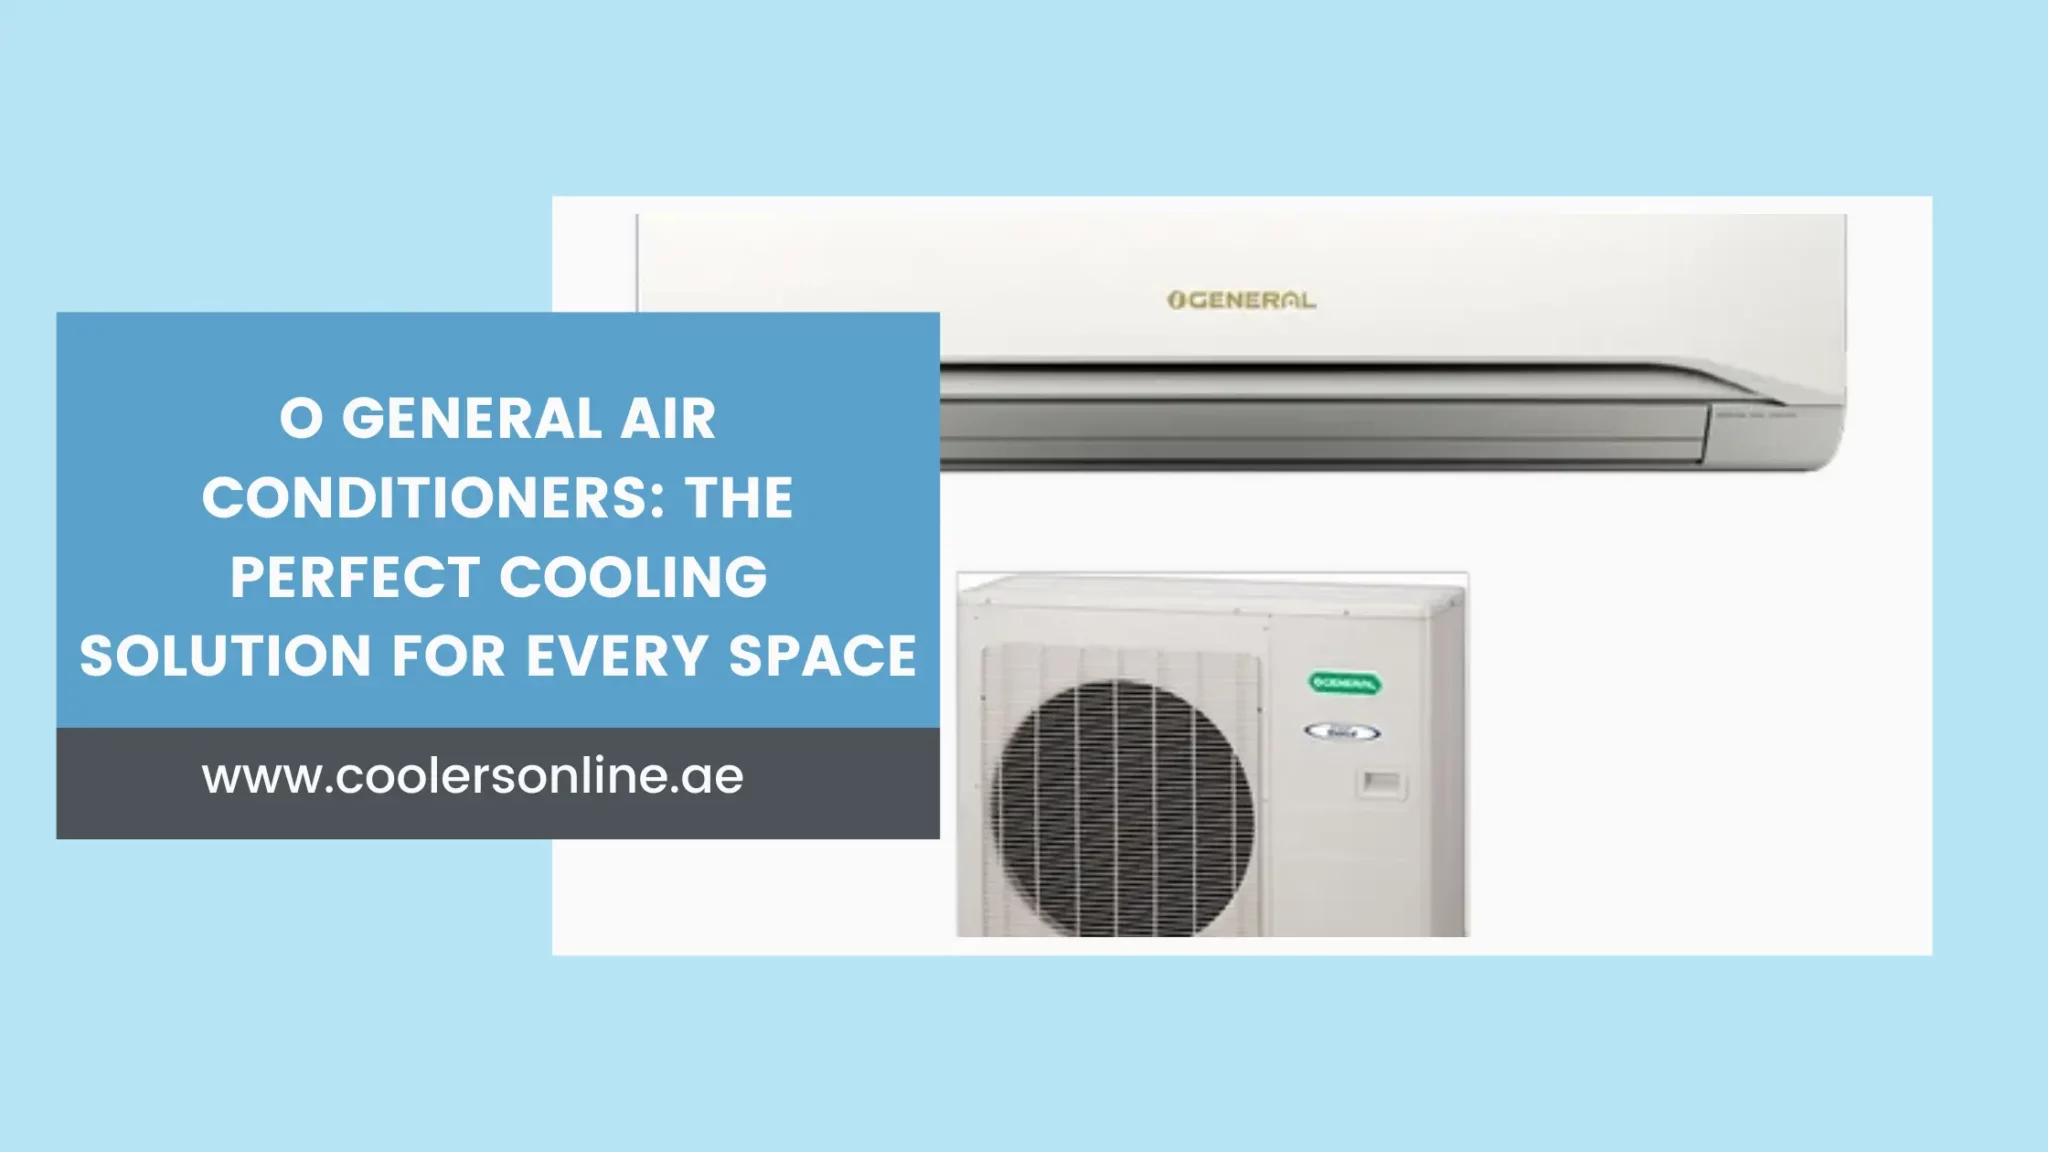 O General Air Conditioners: The Perfect Cooling Solution for Every Space